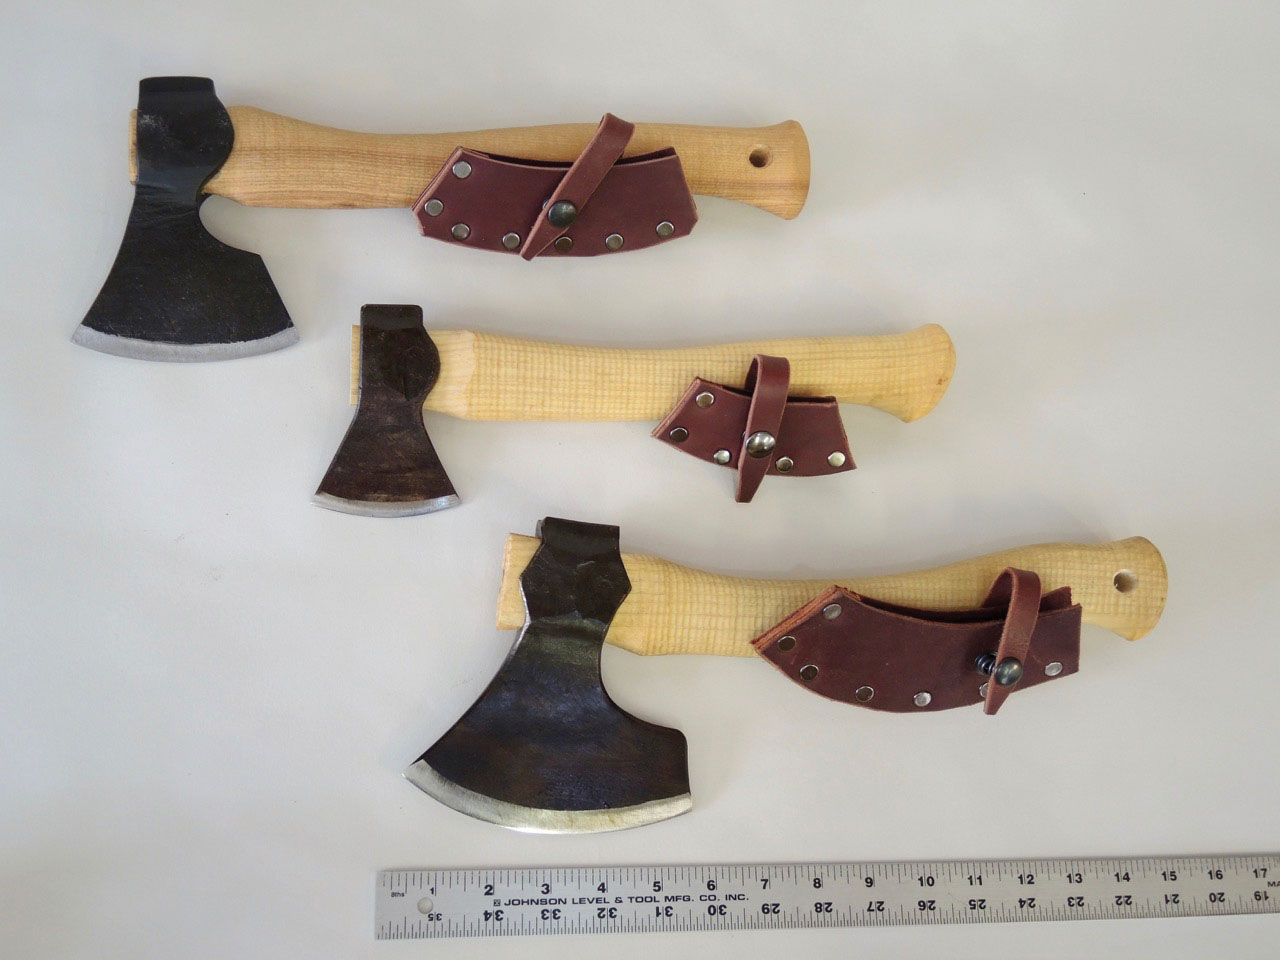 broad axe reproduction